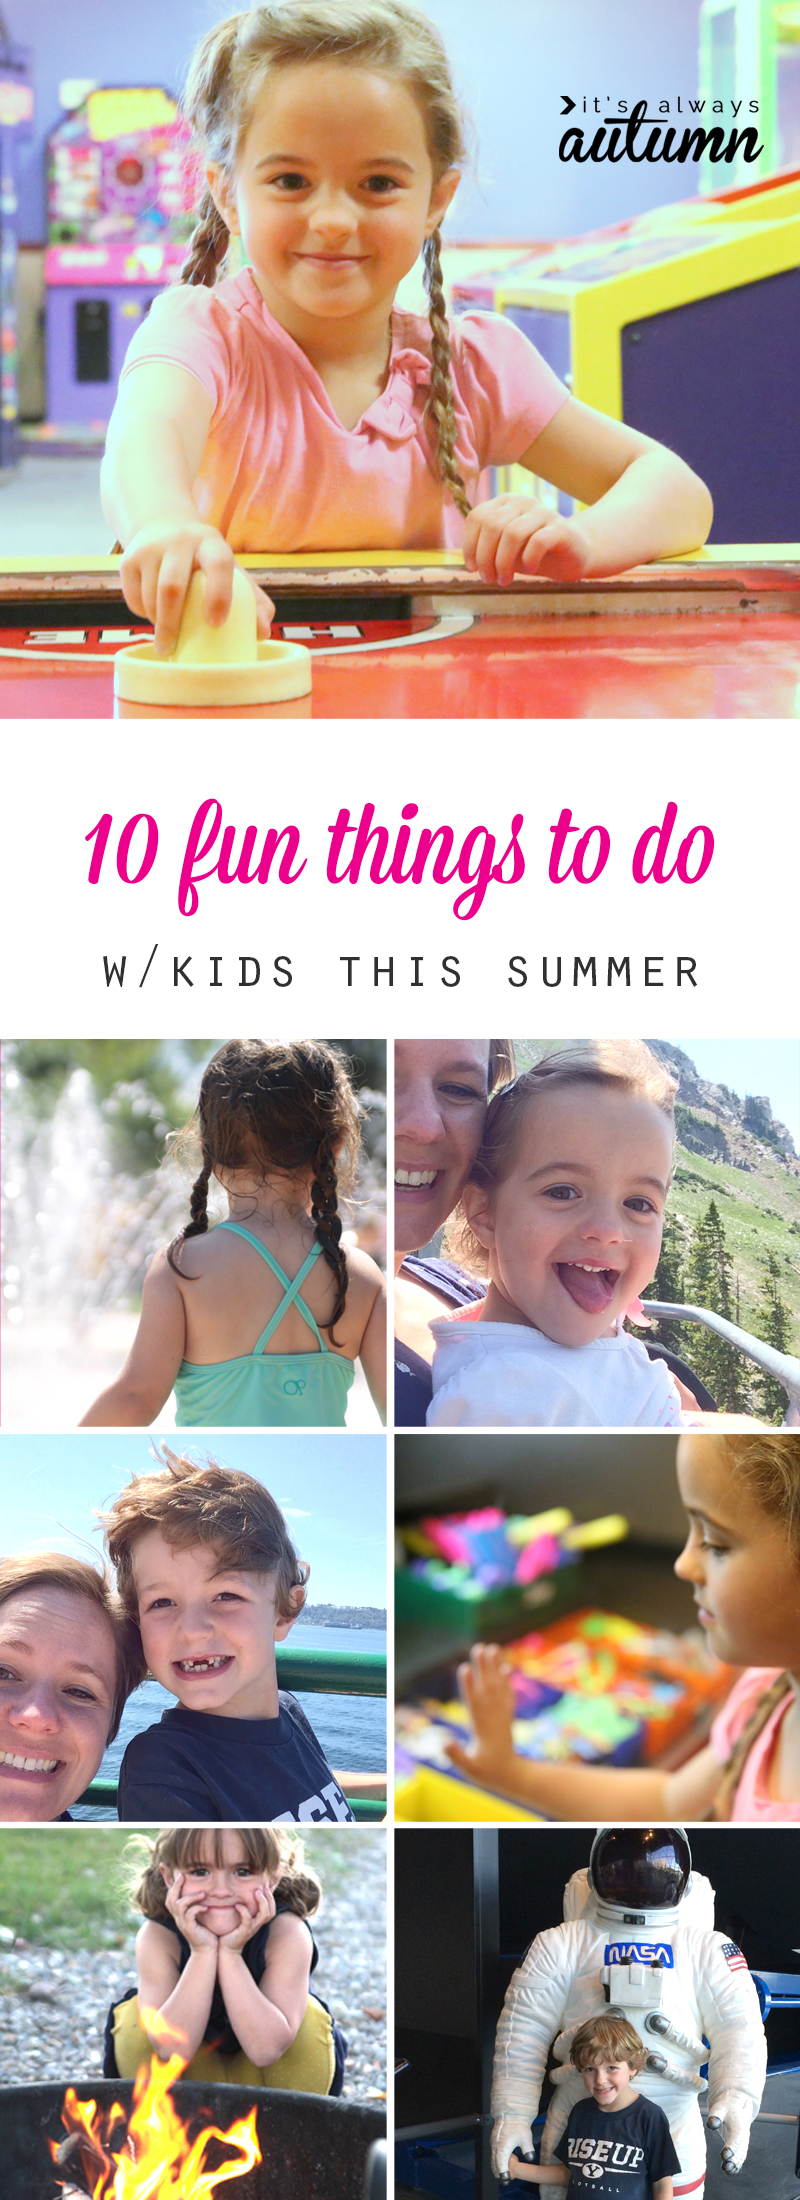 Don't let boredom ruin your summer! 10 super fun things to do with your kids when you need to get out of the house.